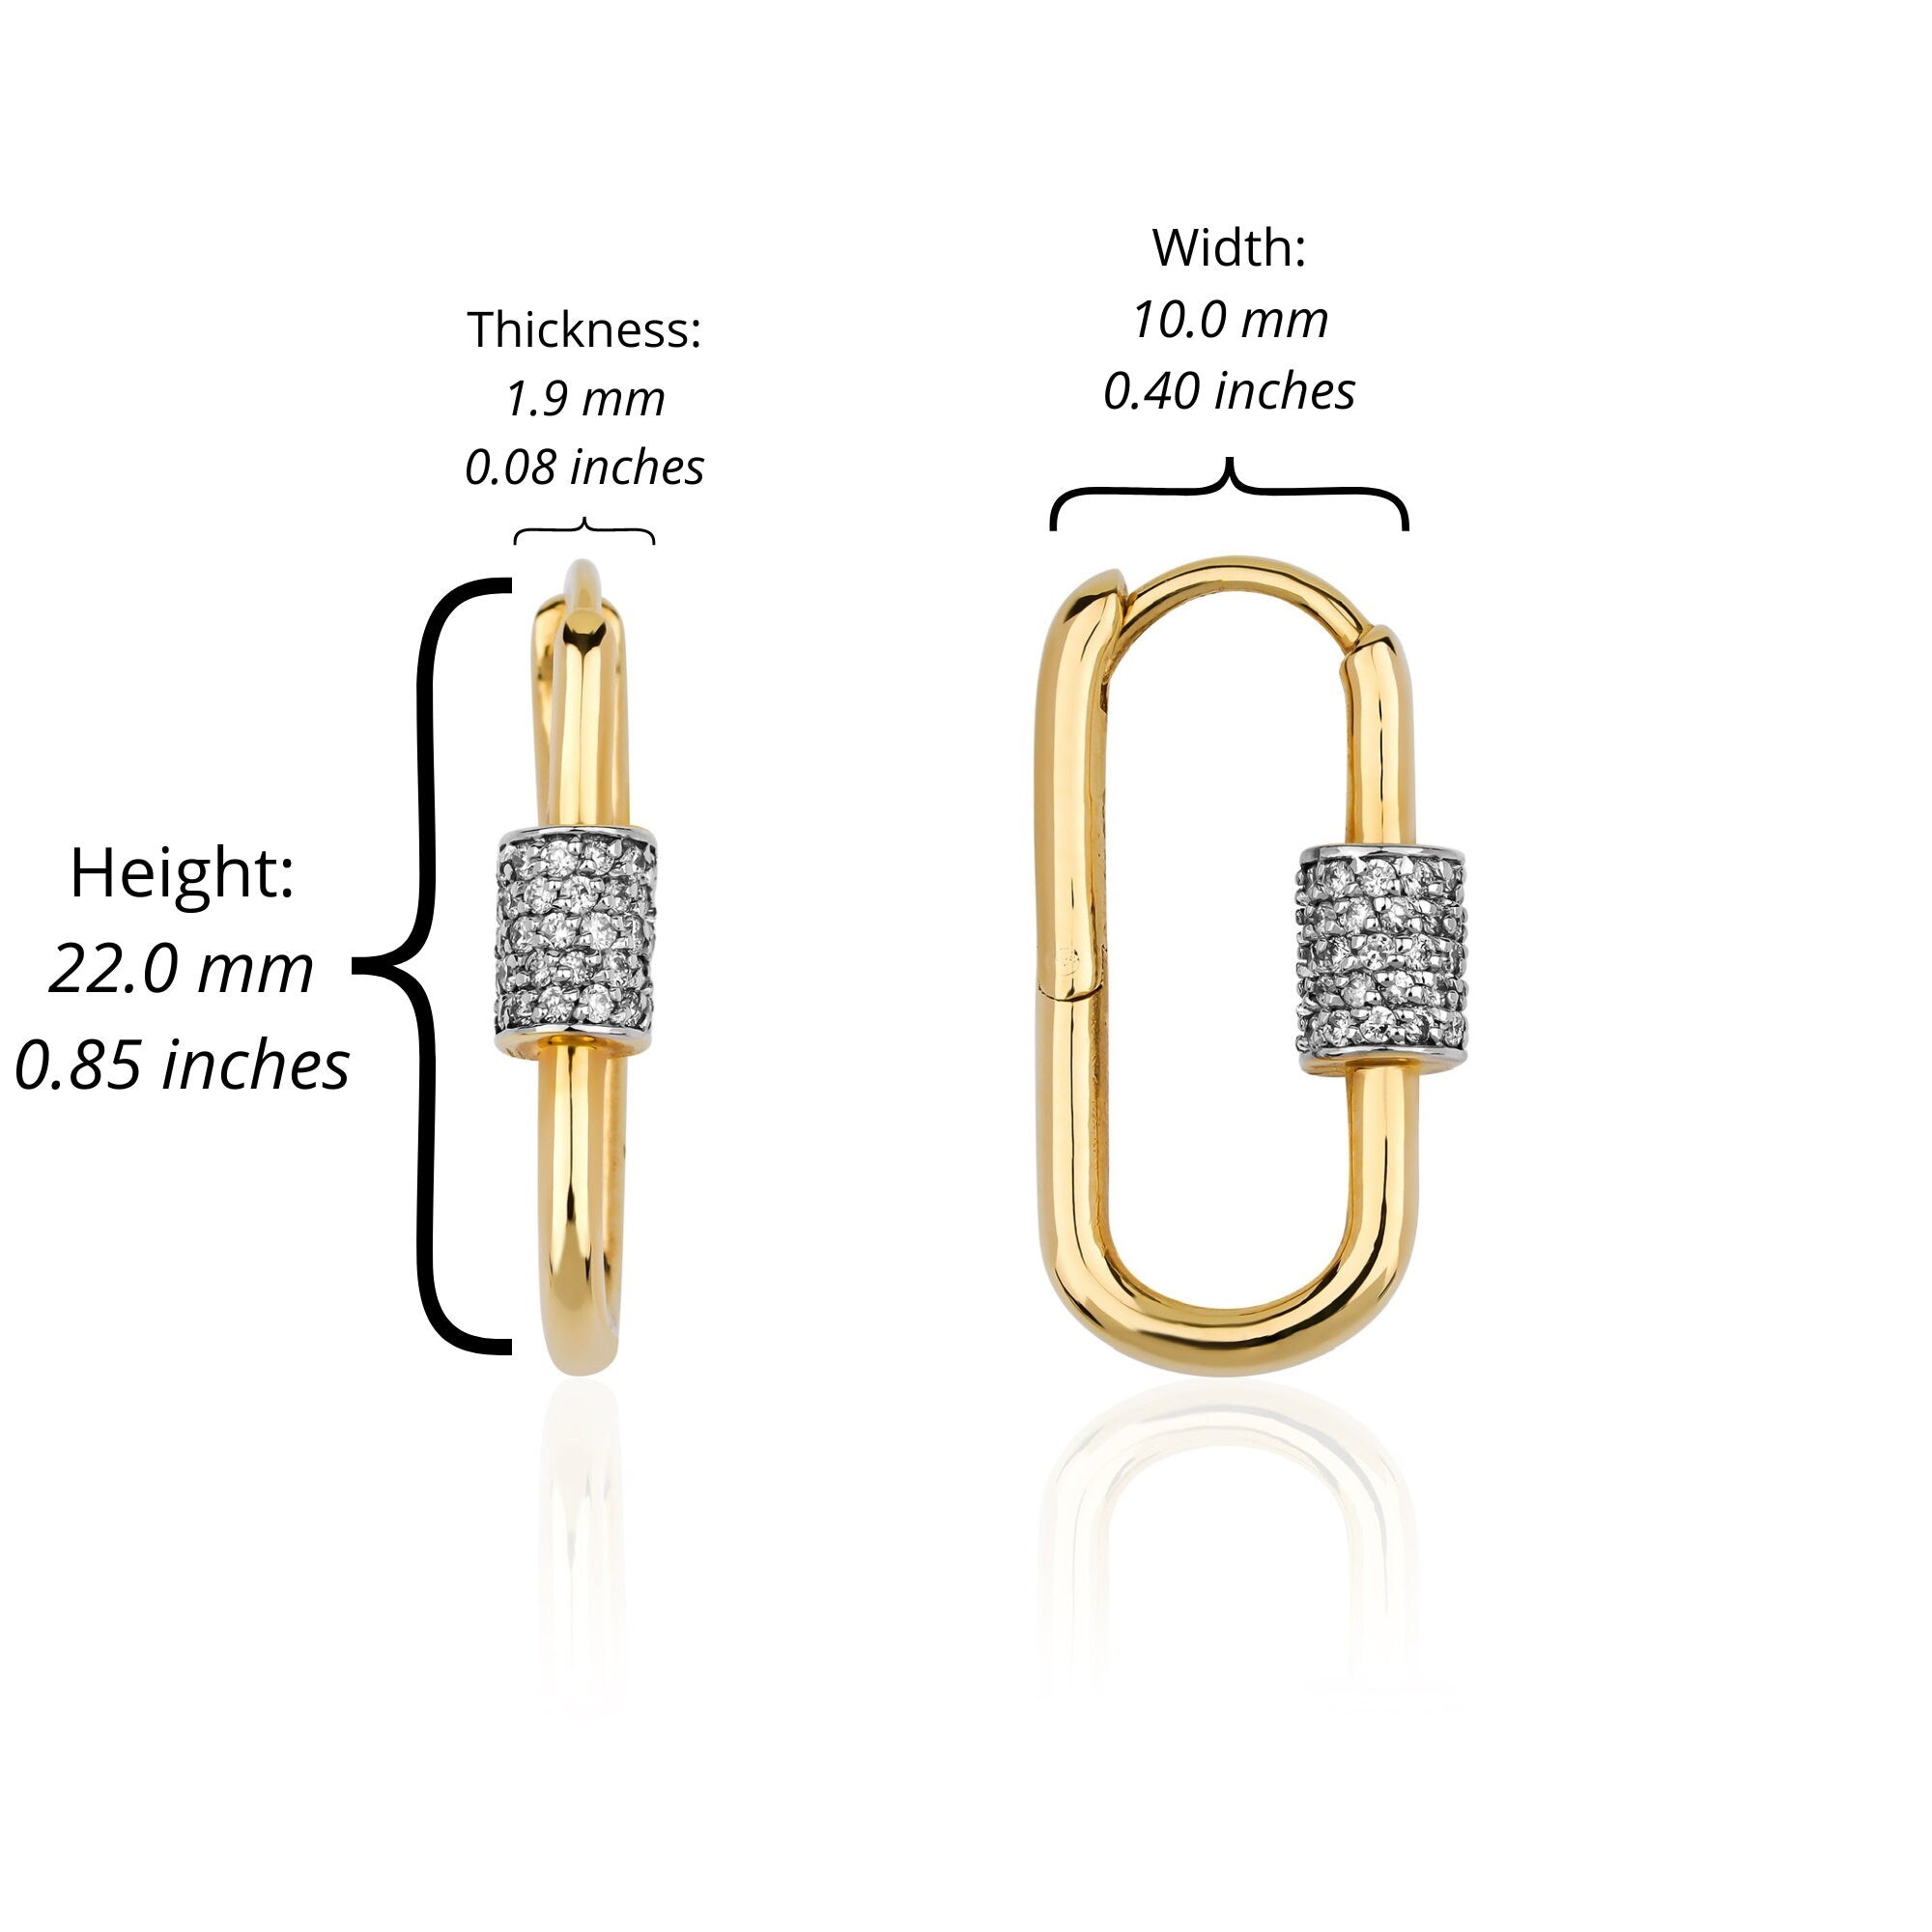 Diamond Carabiner Earrings Available in 14K and 18K Gold